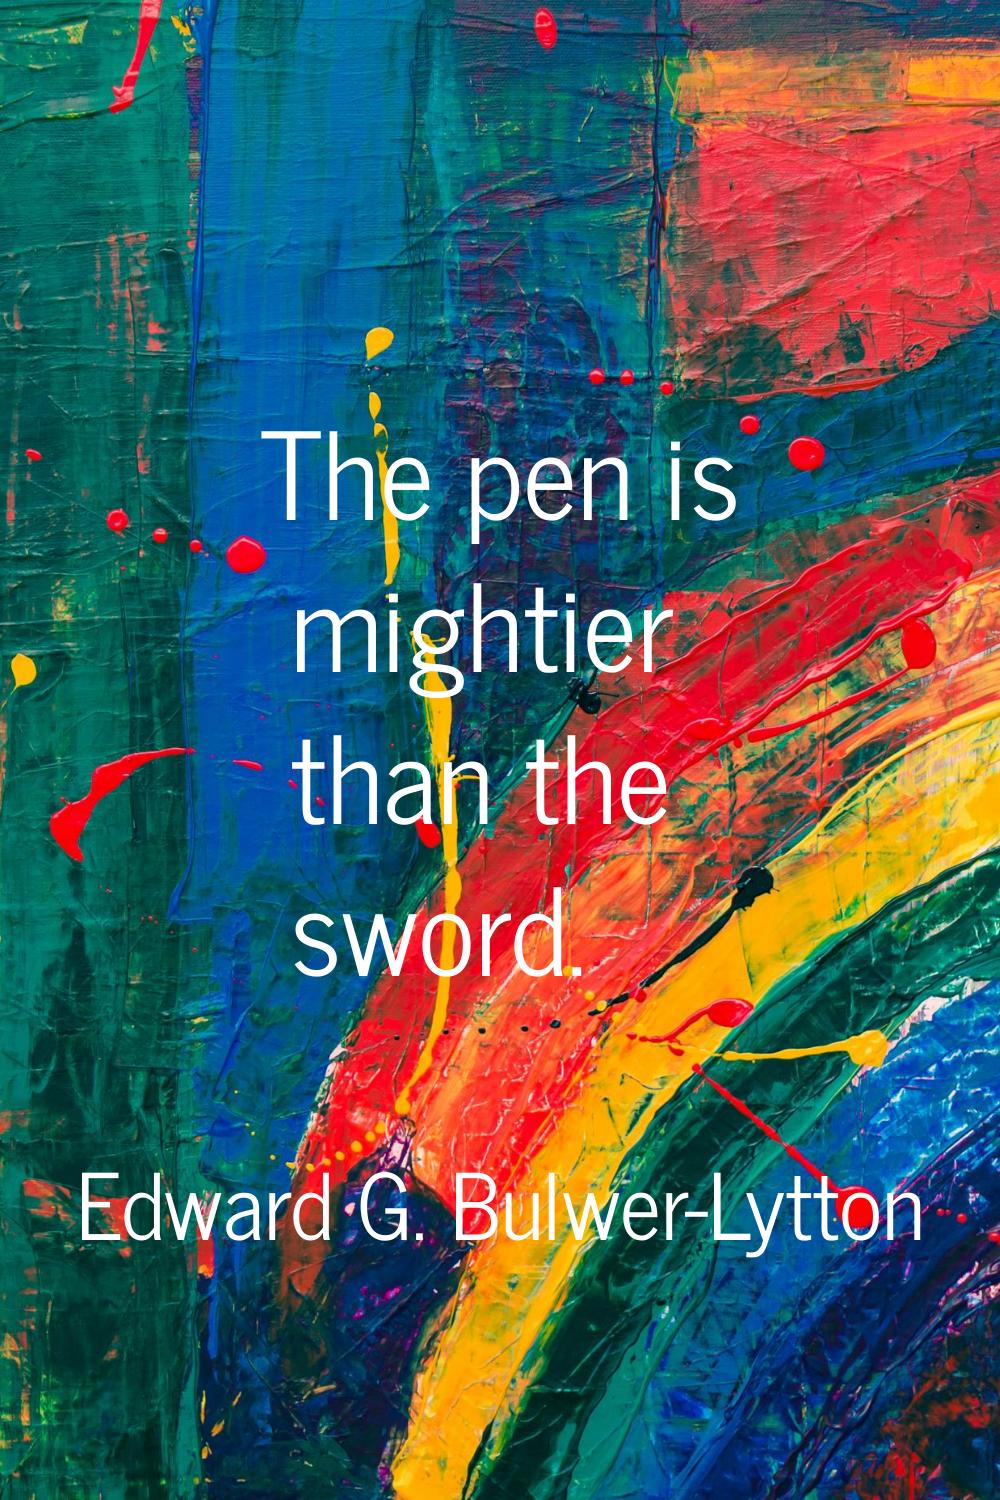 The pen is mightier than the sword.